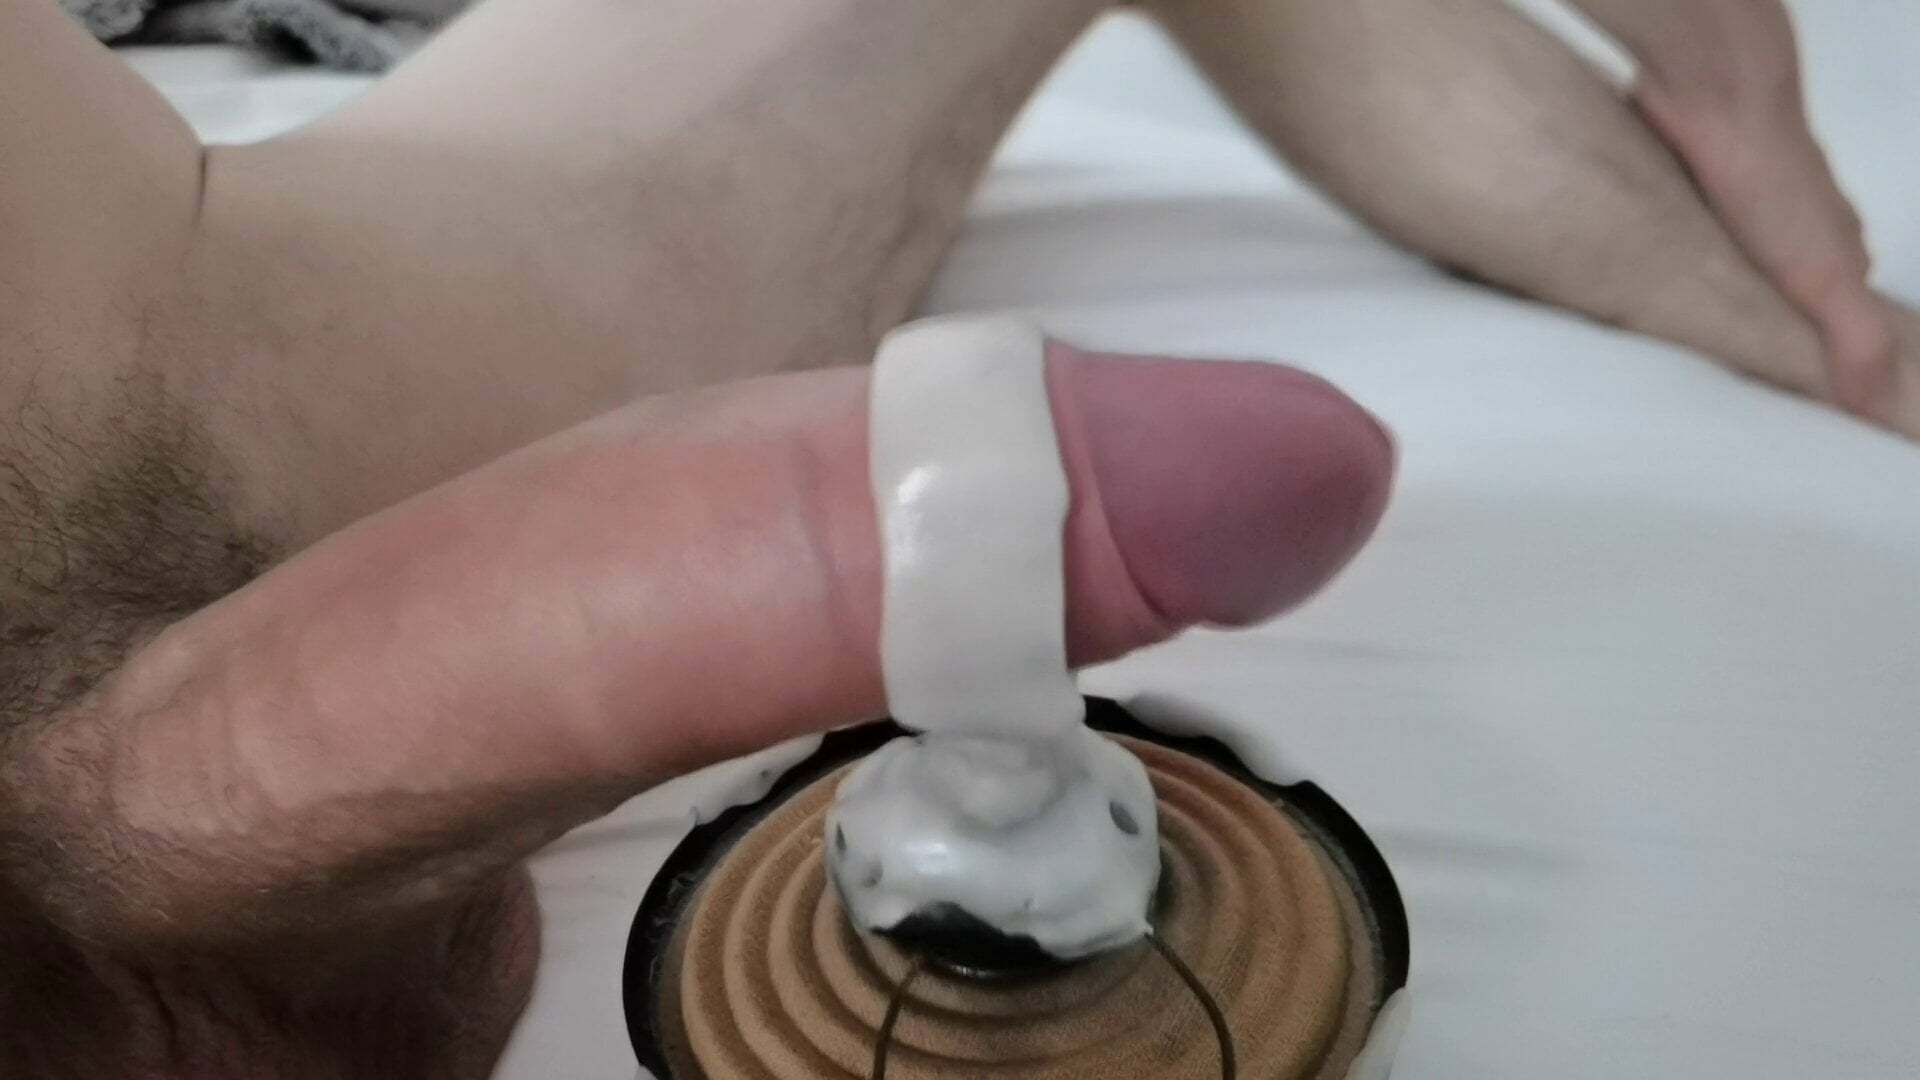 This new male Vibrator shakes my whole cock